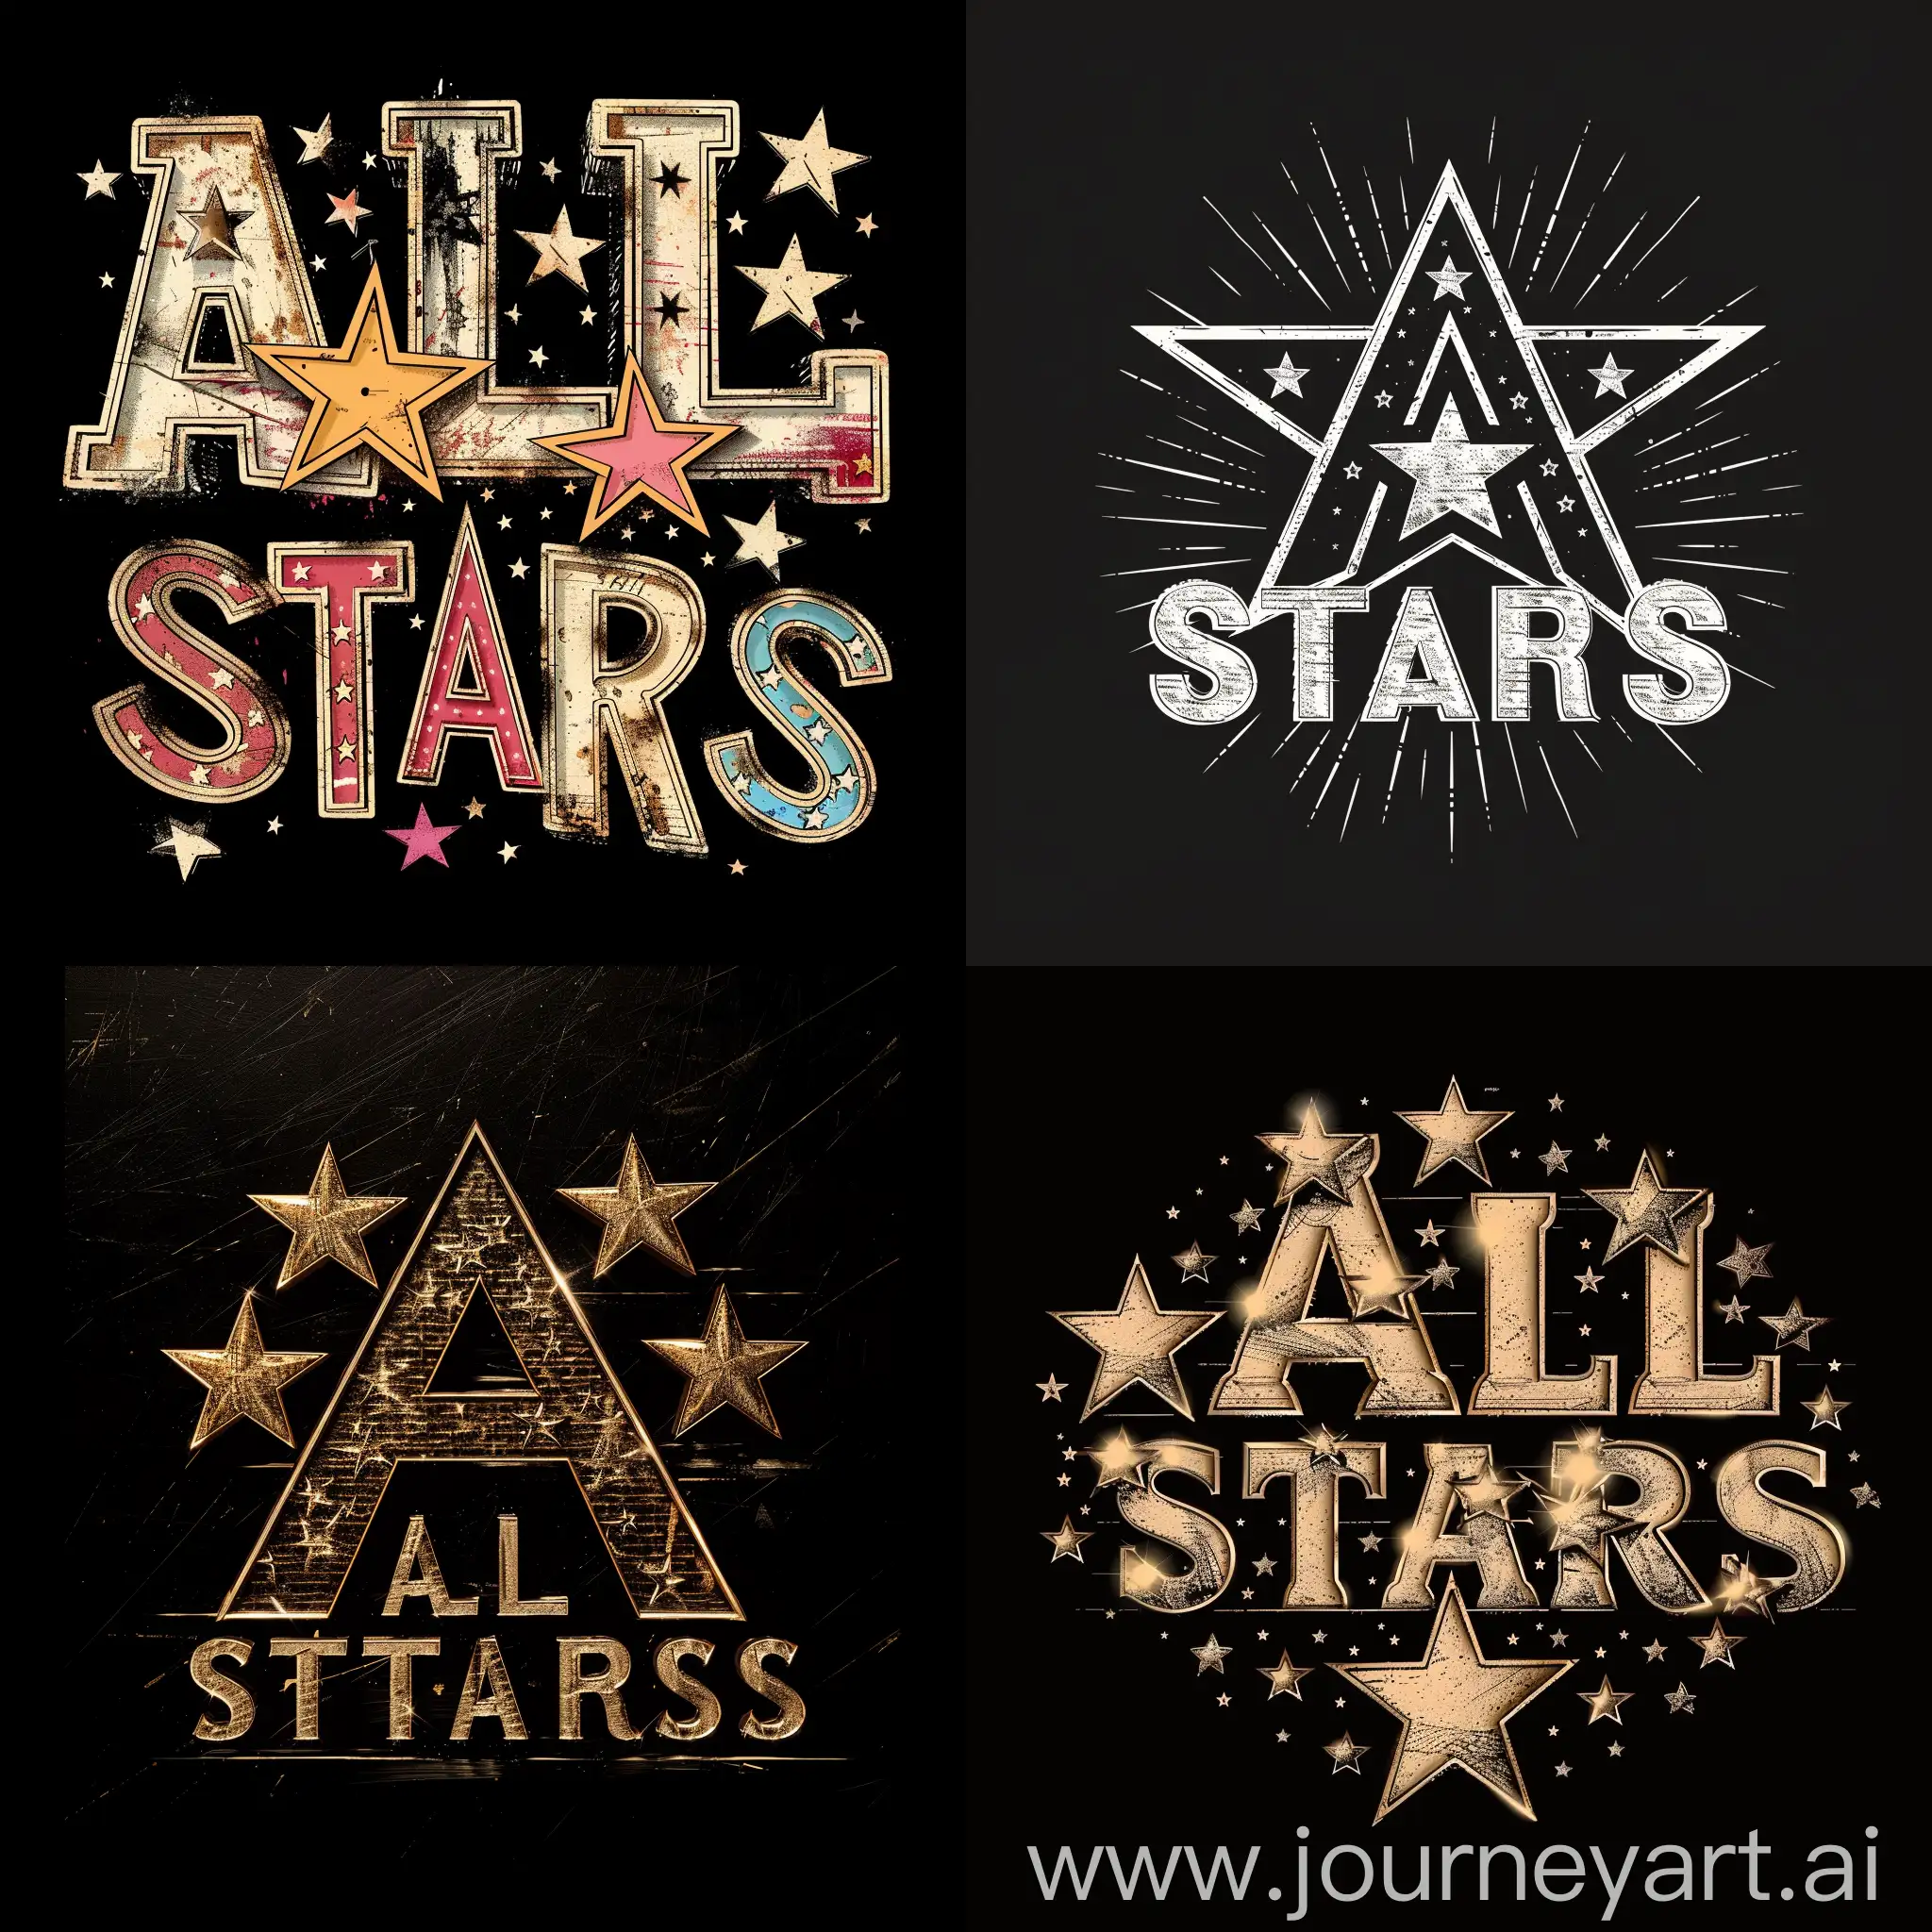 Bold-ALL-STARS-Inscription-on-Black-Background-with-Star-in-A